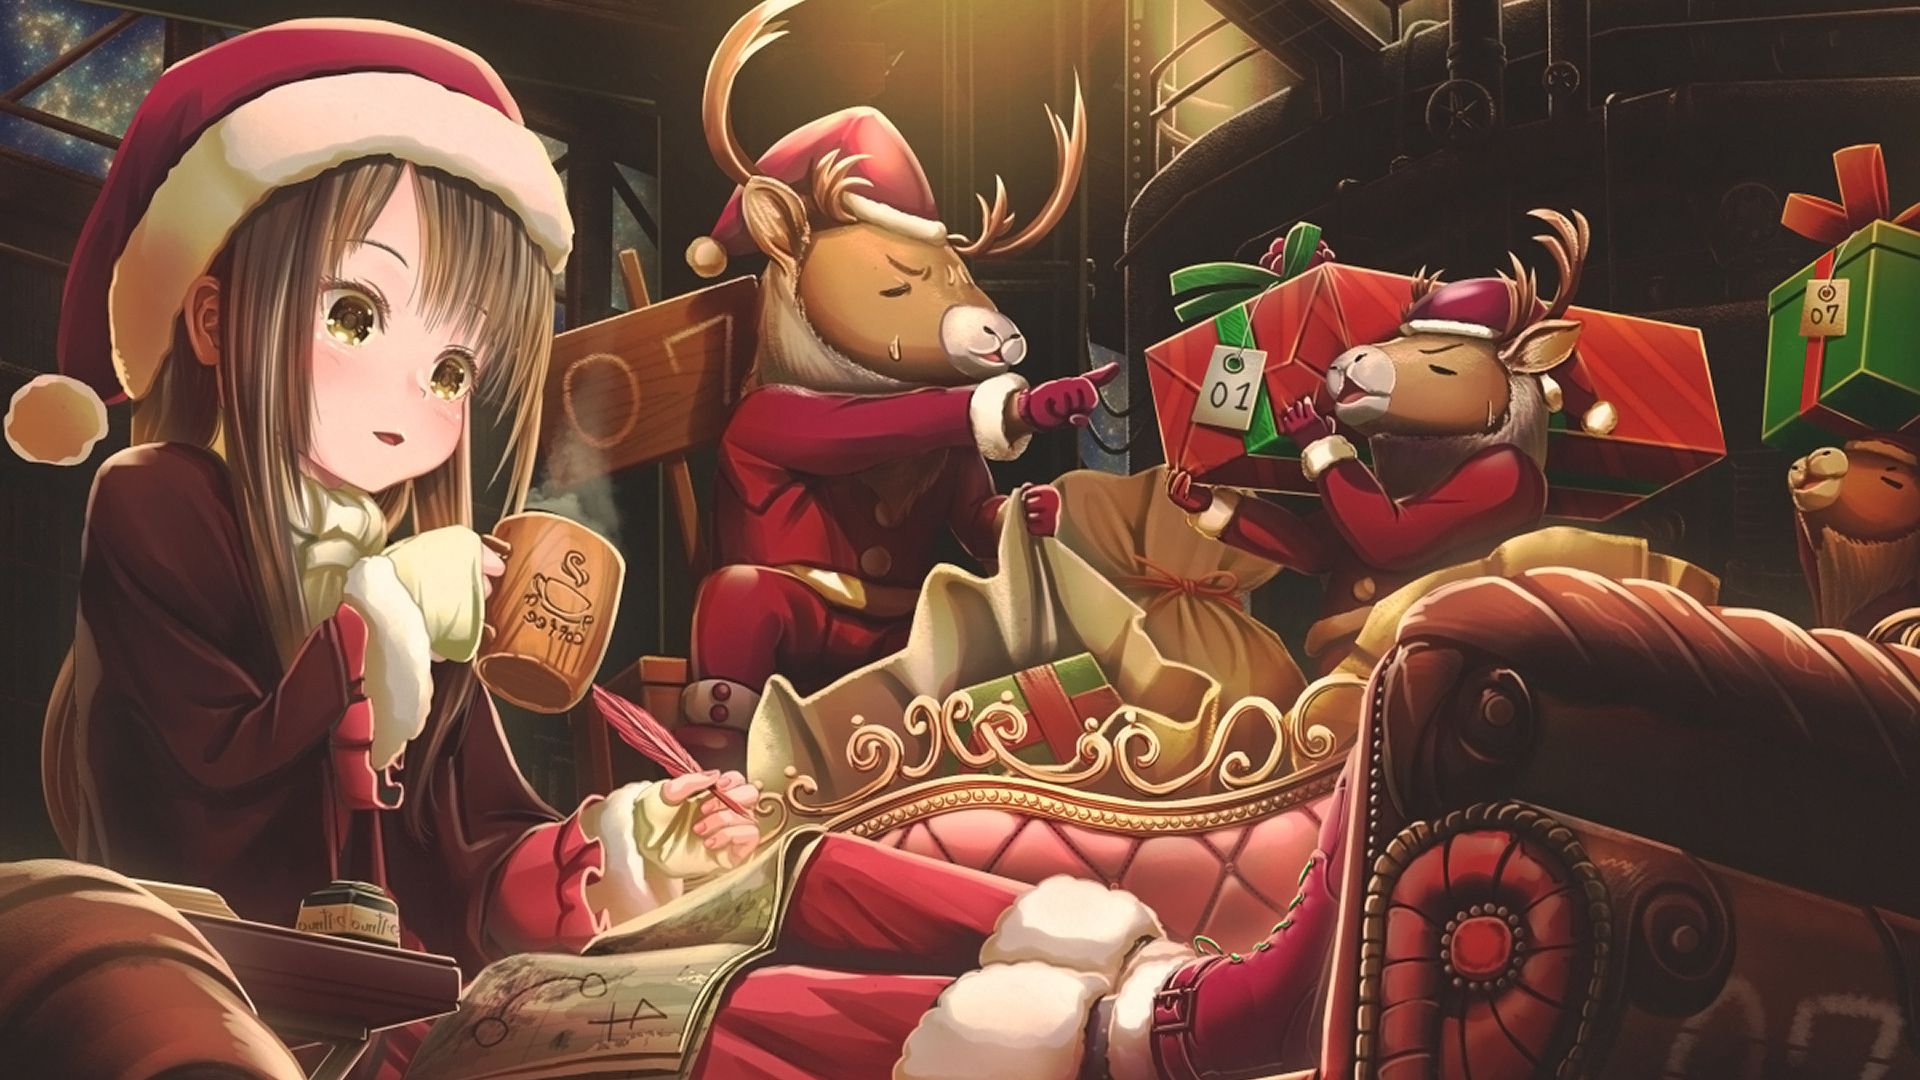 Desktop Wallpapers Christmas, Anime, Anime Girl, Hd Image, Picture, Background, Fdecd5